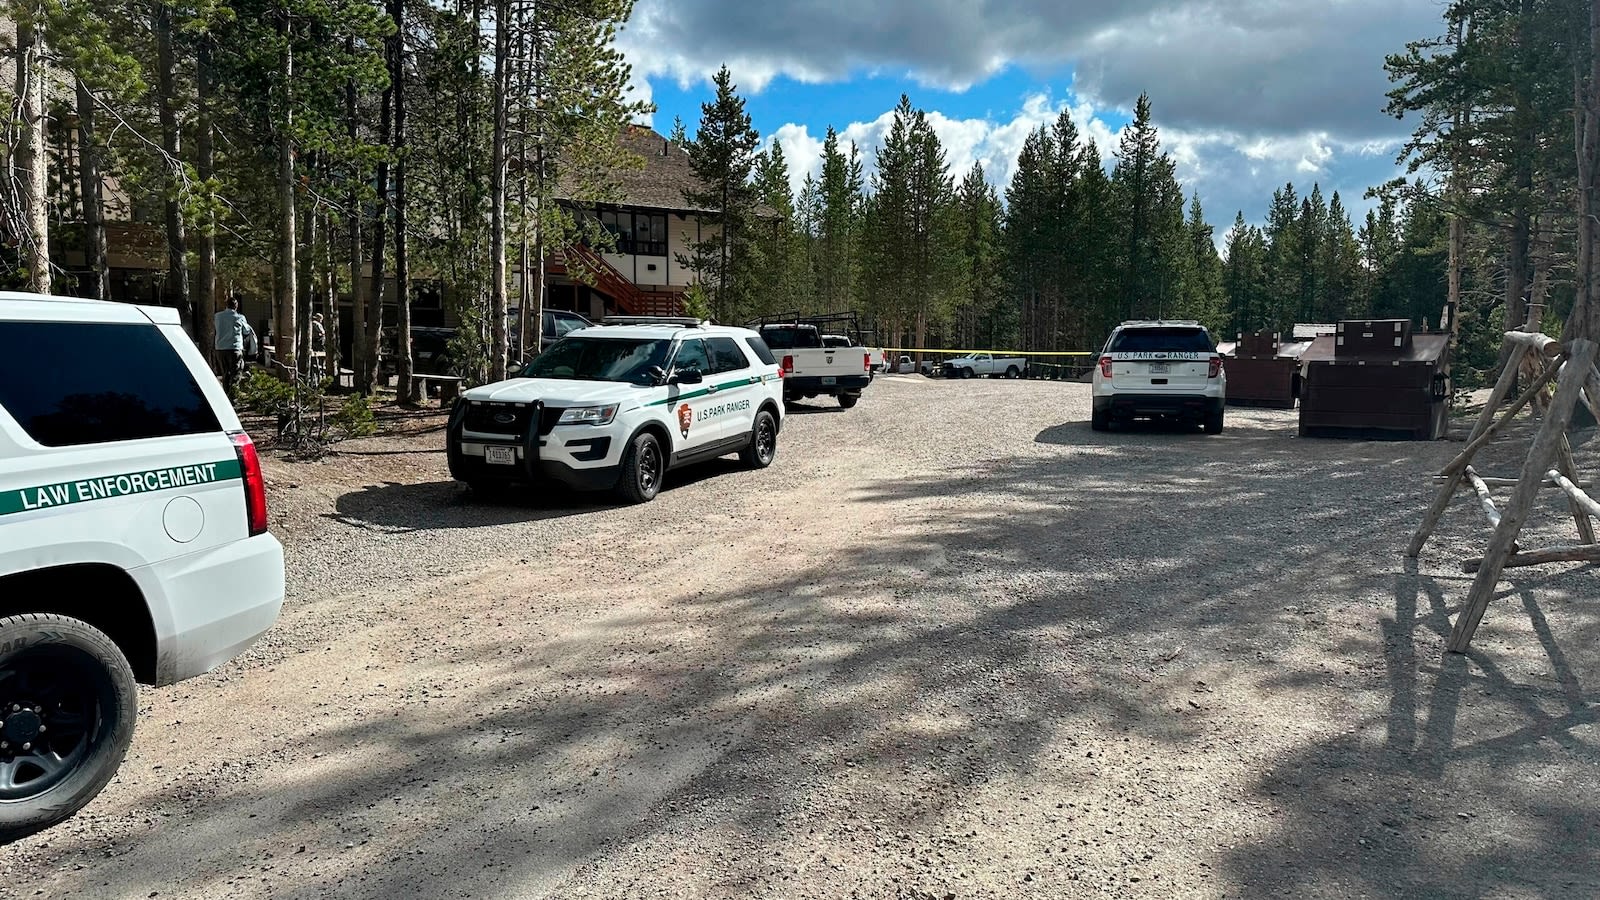 Suspect fatally shot by park rangers at Yellowstone National Park after allegedly making threats